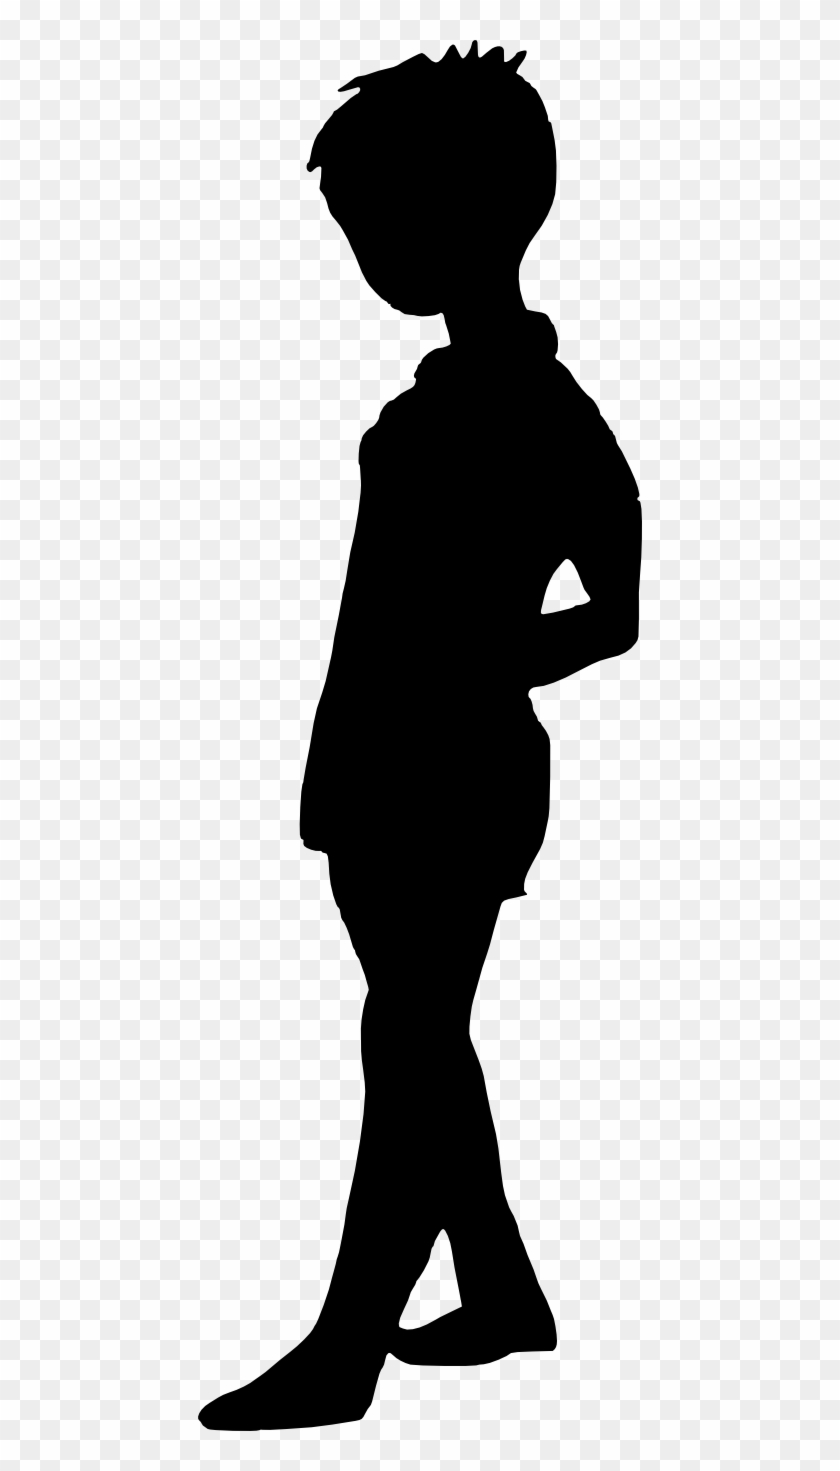 Free Download - Boy Silhouette Transparent Background #257315